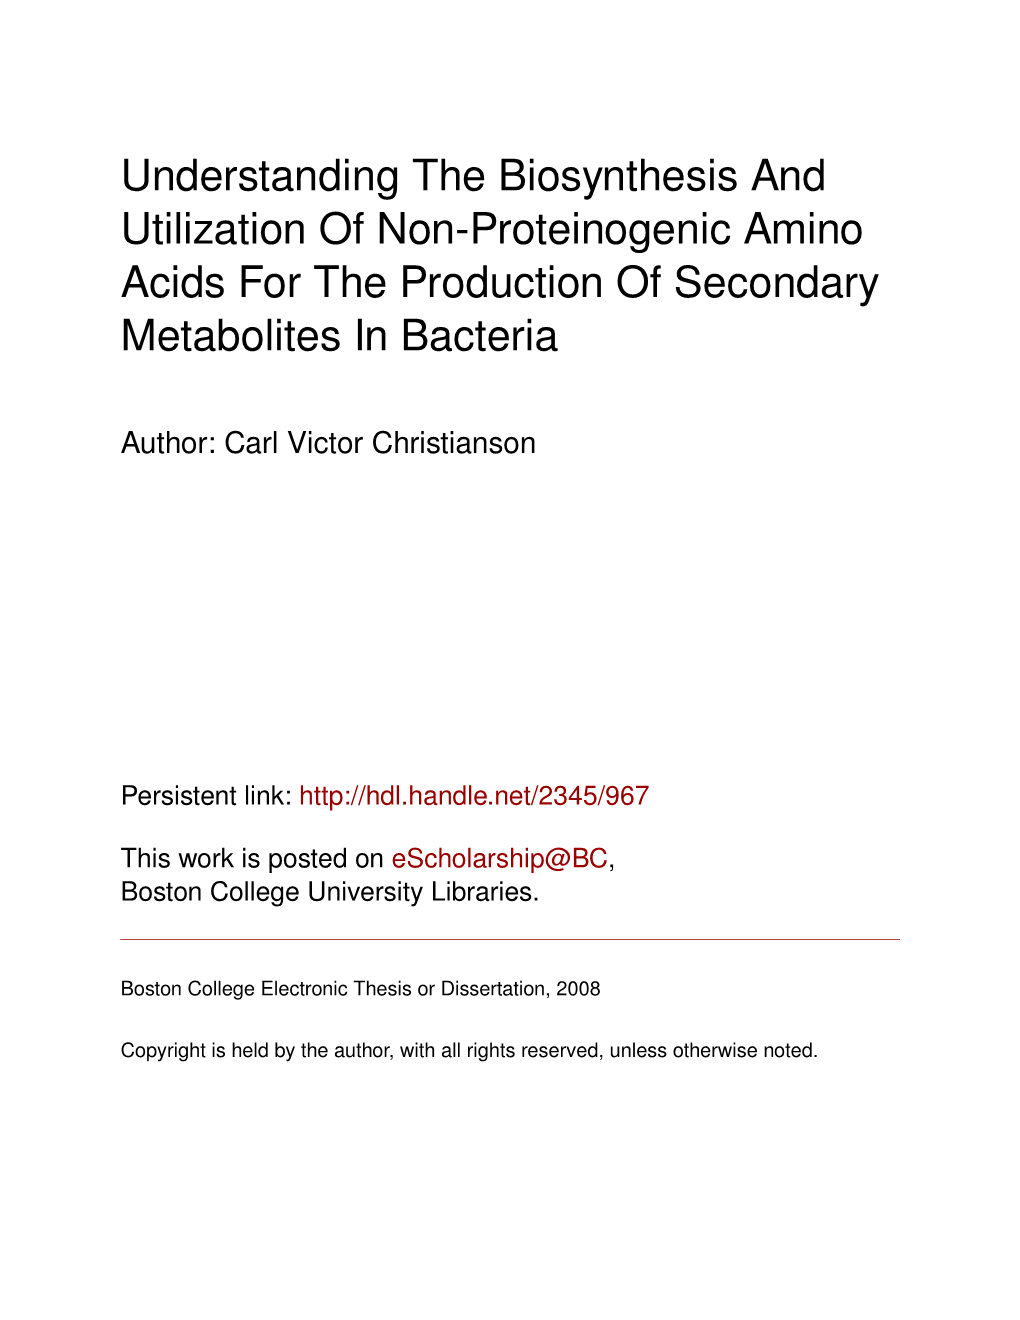 Understanding the Biosynthesis and Utilization of Non-Proteinogenic Amino Acids for the Production of Secondary Metabolites in Bacteria